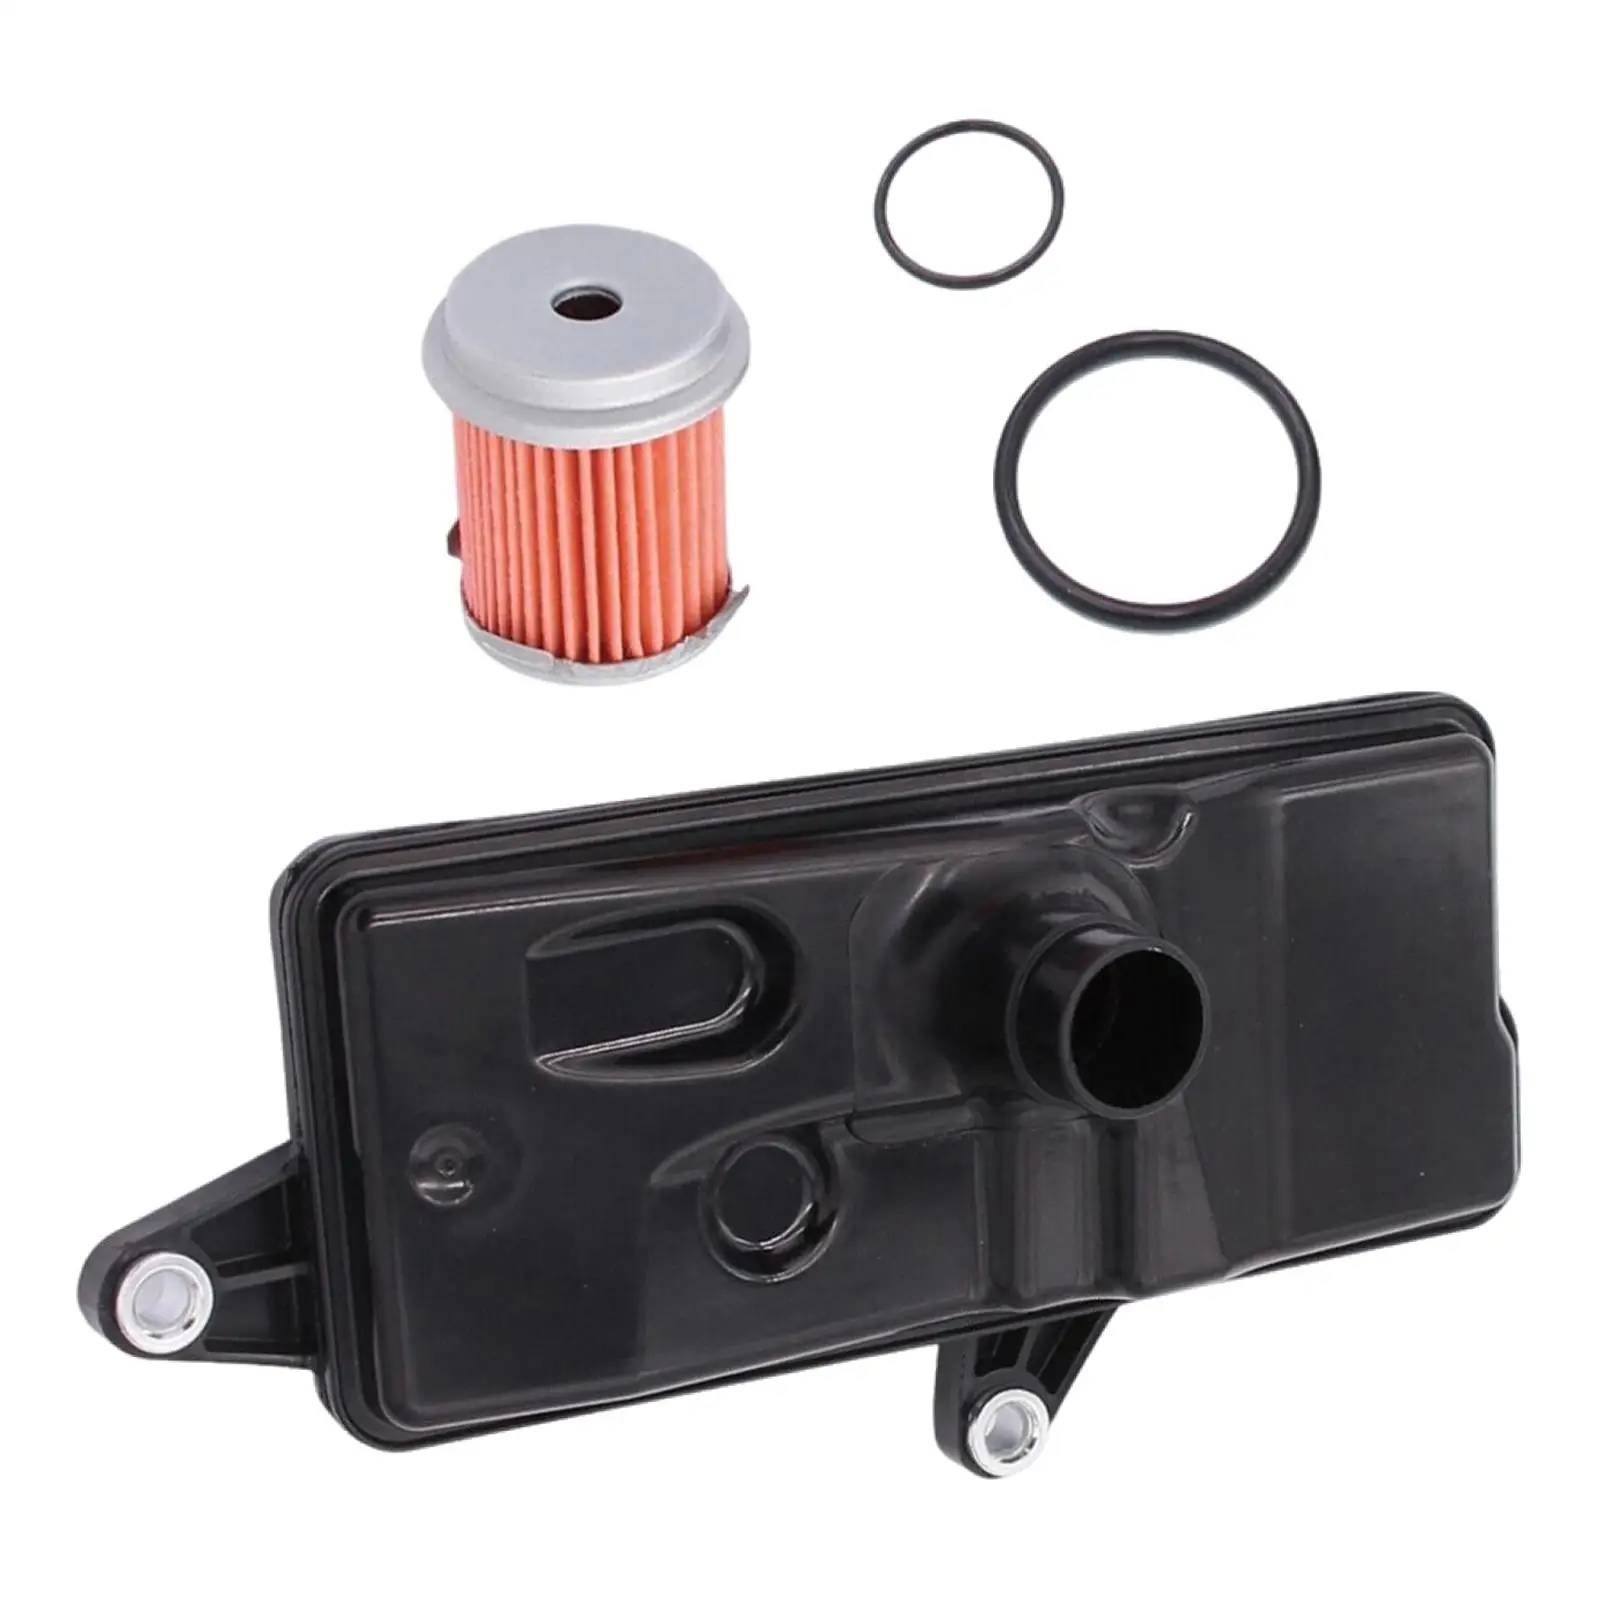 Transmission Gearbox Internal Filter 25450-p4V-013 Professional for Civic FC7 Vehicle Repair Parts Convenient Installation